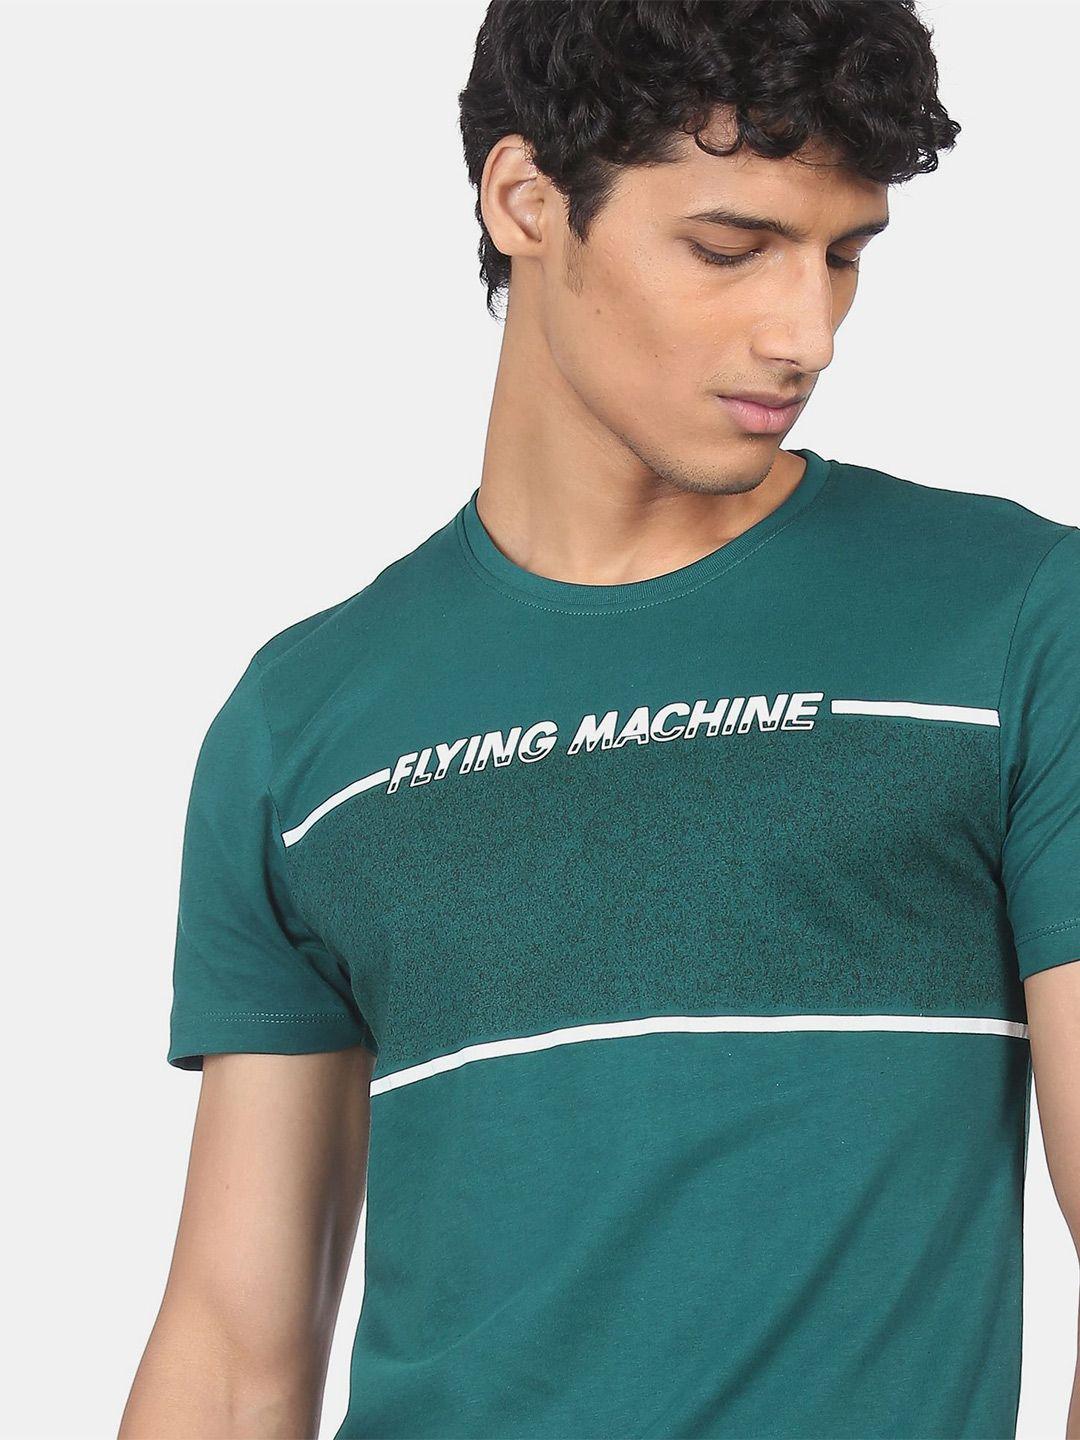 flying-machine-men-teal-green-typography-printed-pure-cotton-t-shirt